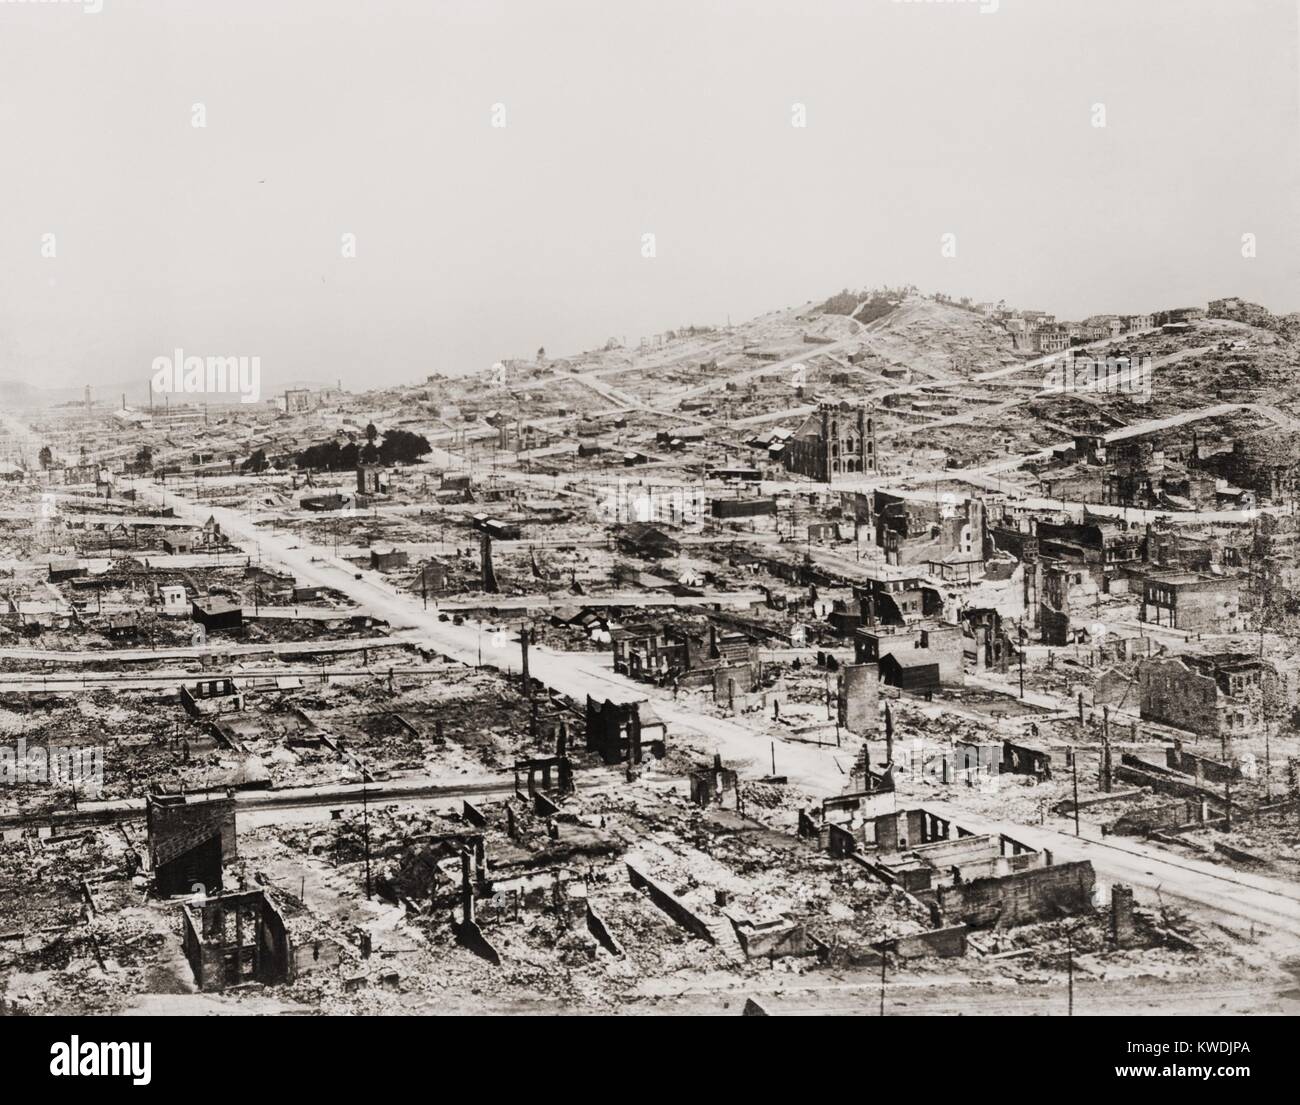 Burnt out ruins of San Francisco after the 3-day fire that followed the earthquake of April 18, 1906 (BSLOC 2017 17 20) Stock Photo